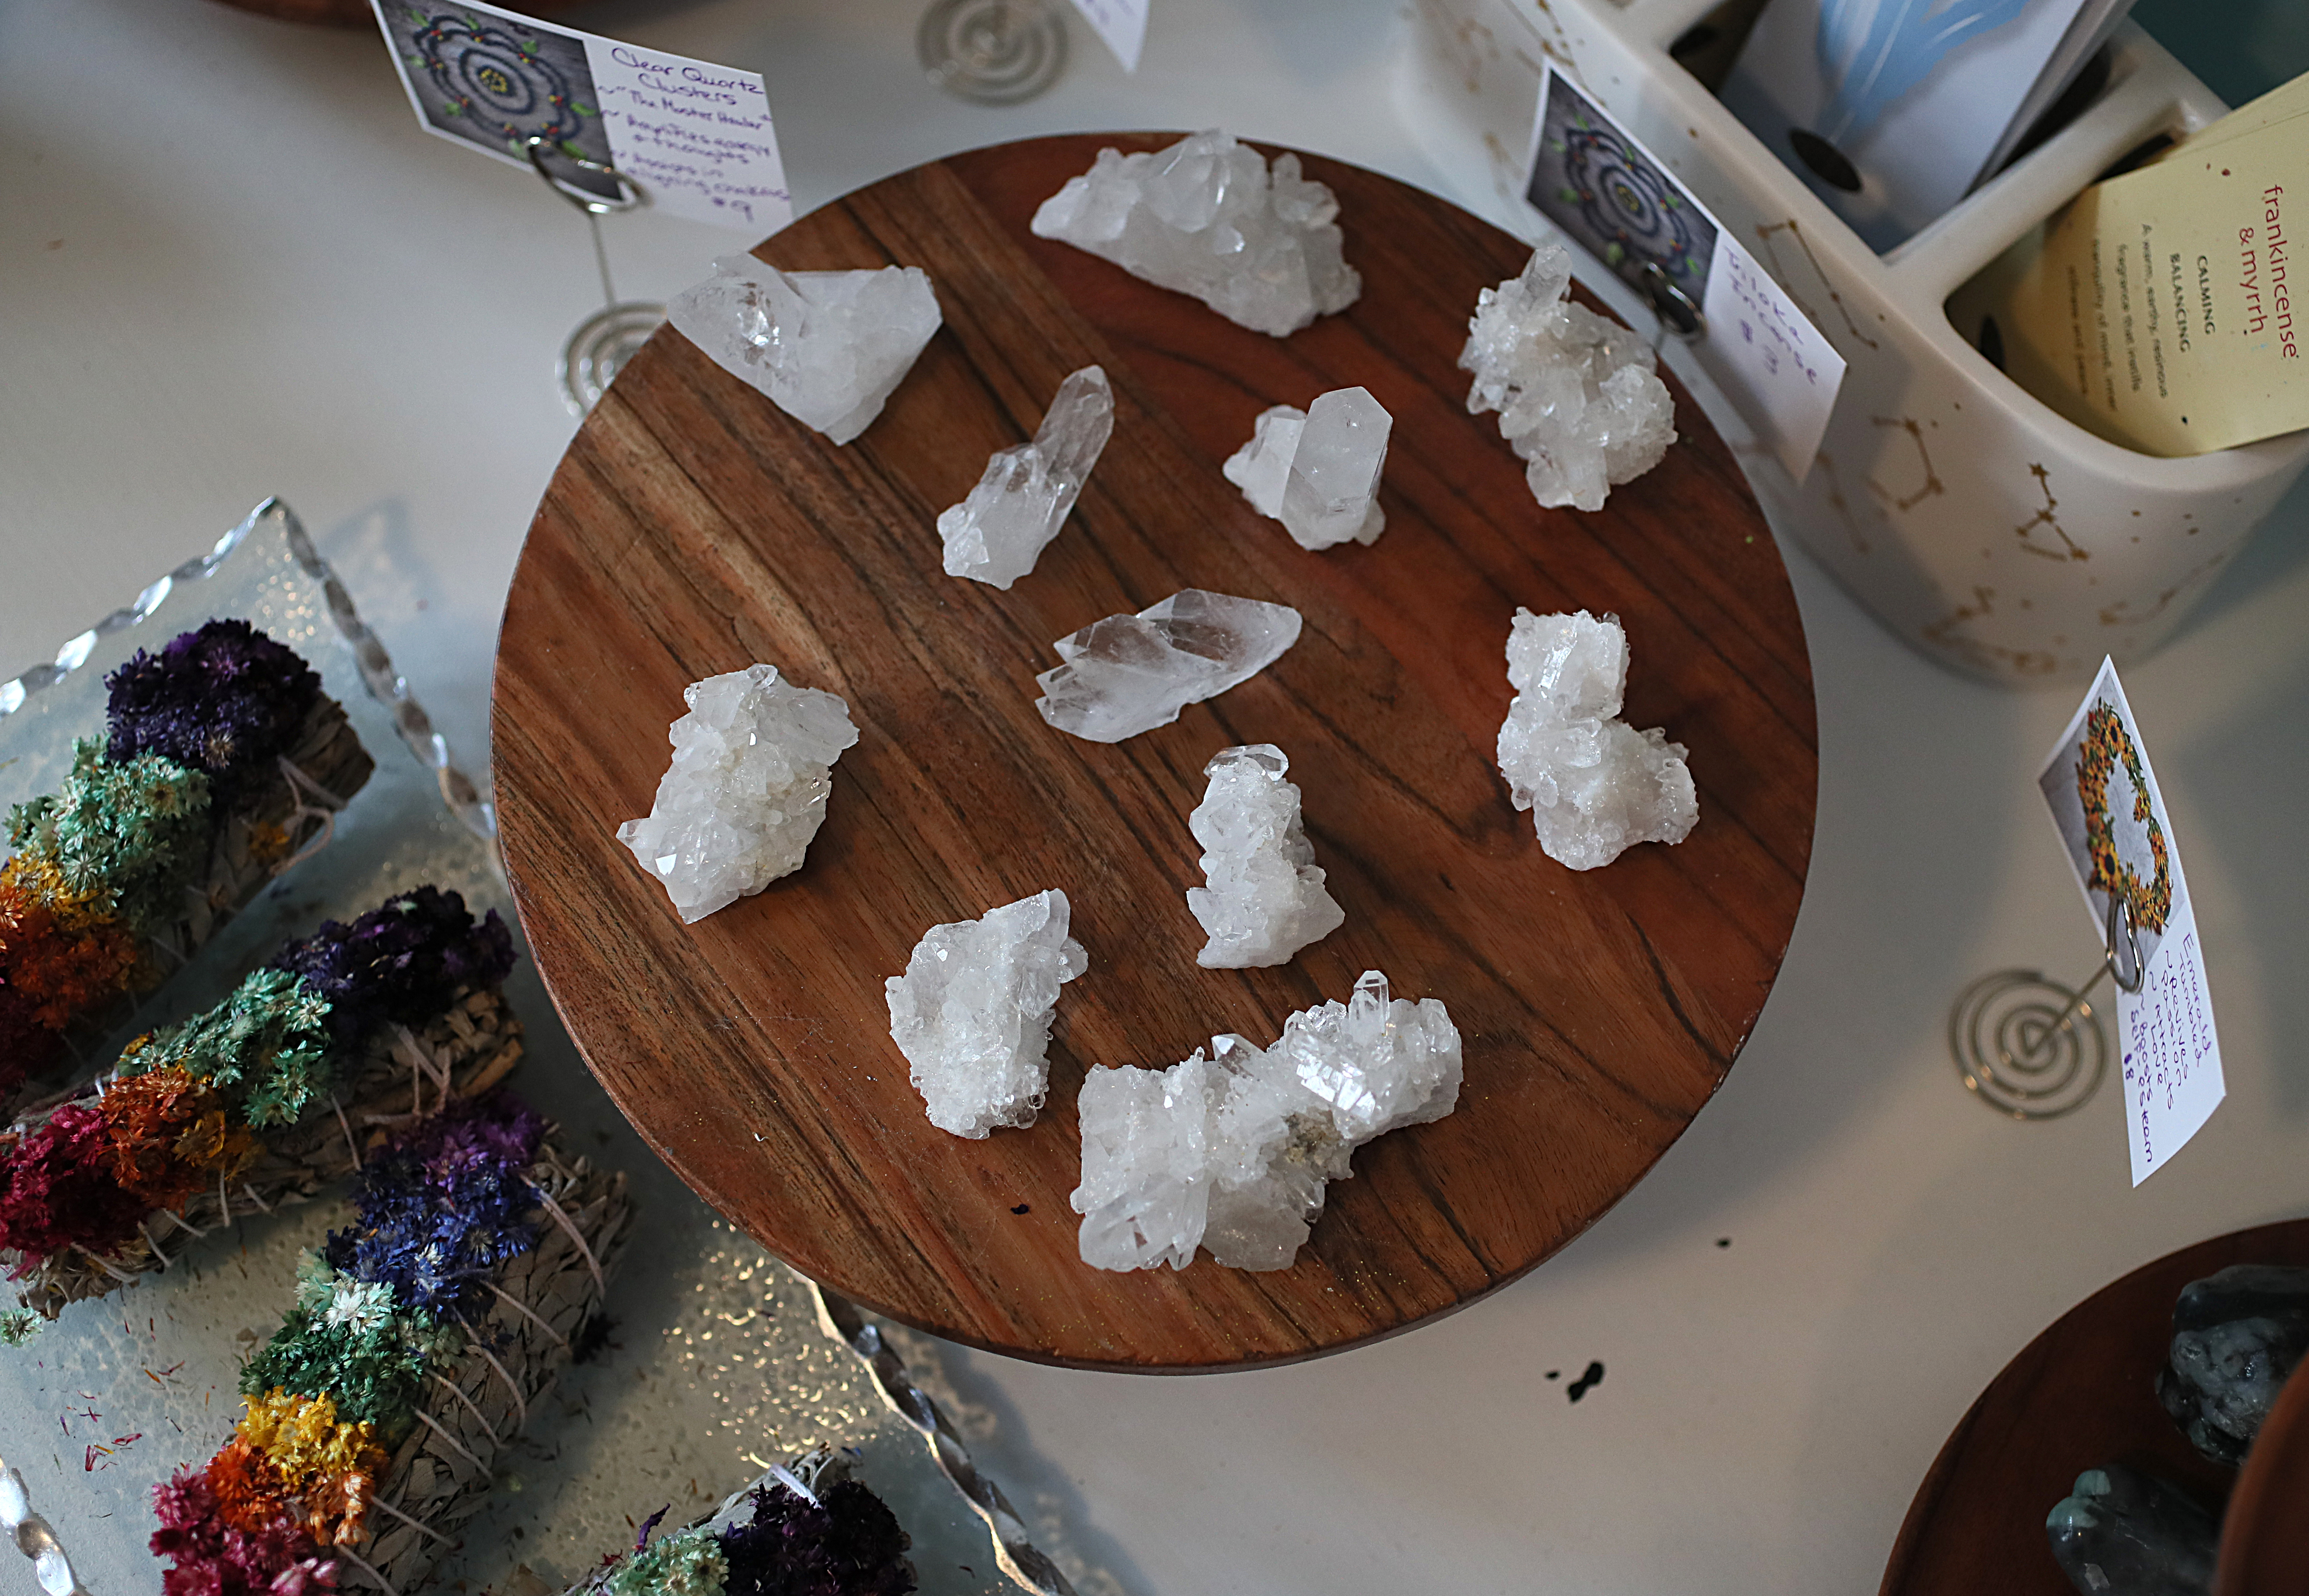 Cluster of clear quartz at the Thrive Tribe Cafe in Barrington.